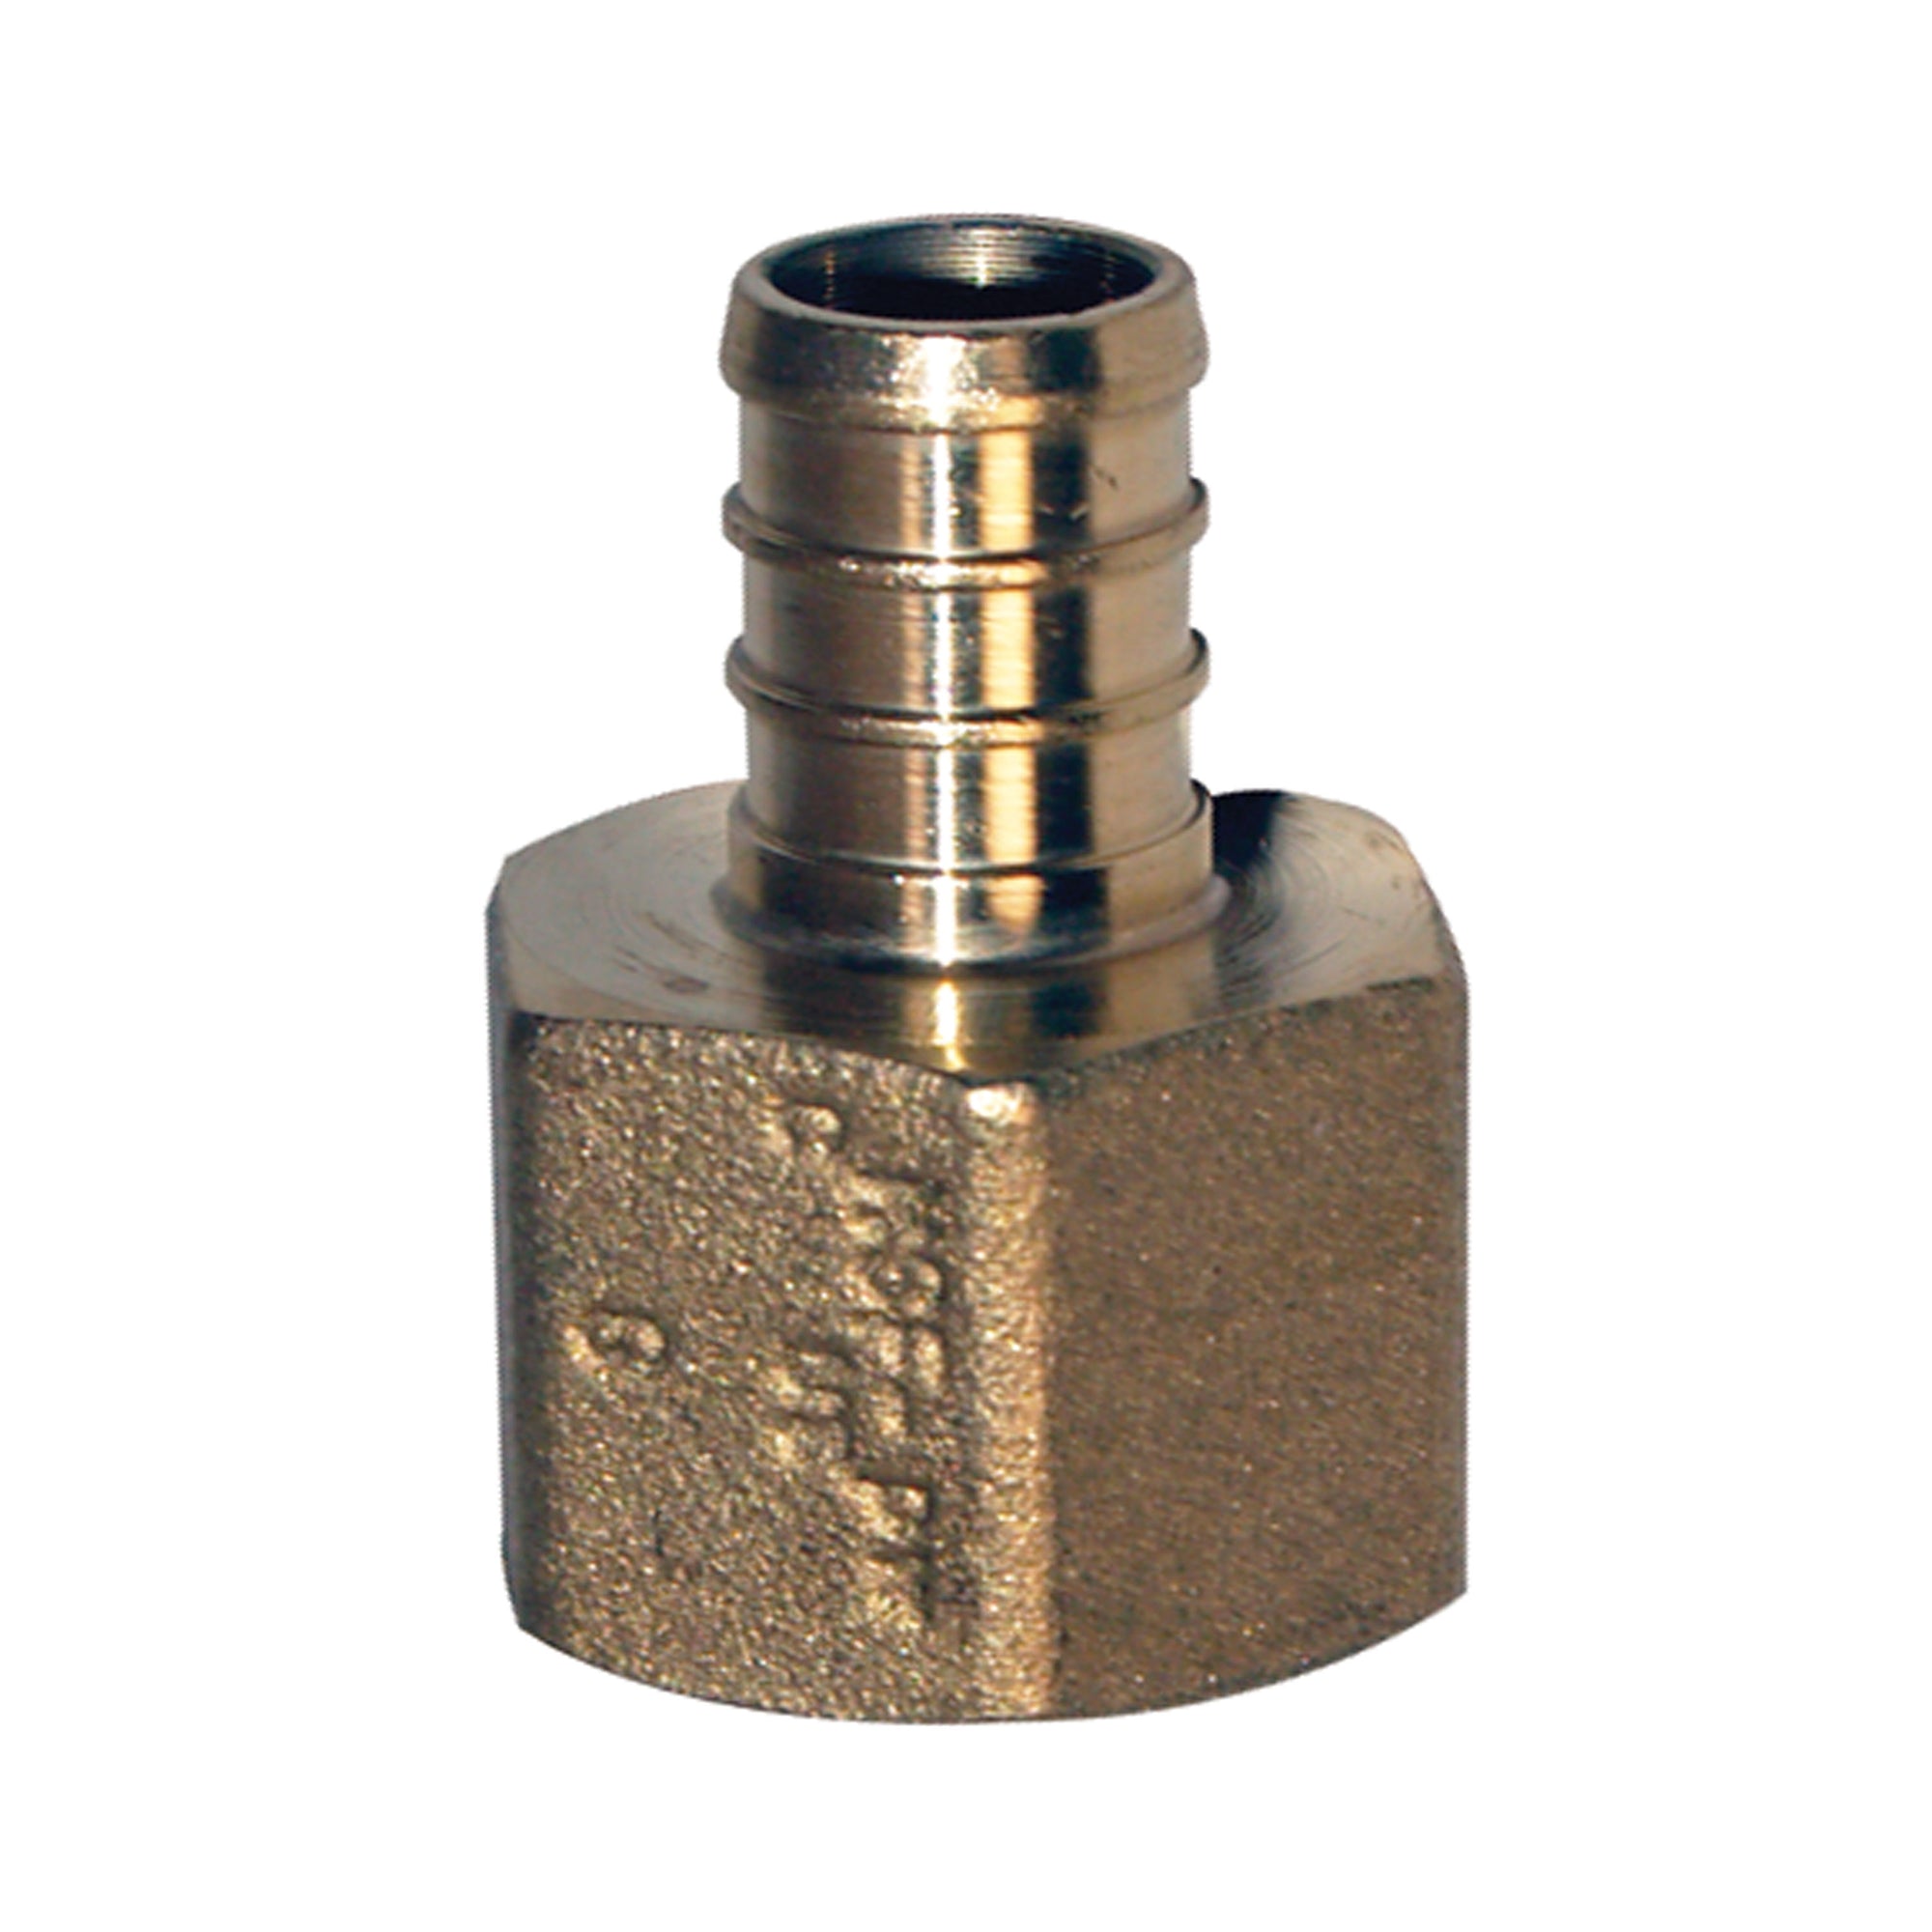 Flair-It 41129 BestPEX Brass Female Adapter - 1/2" x 3/4" FPT